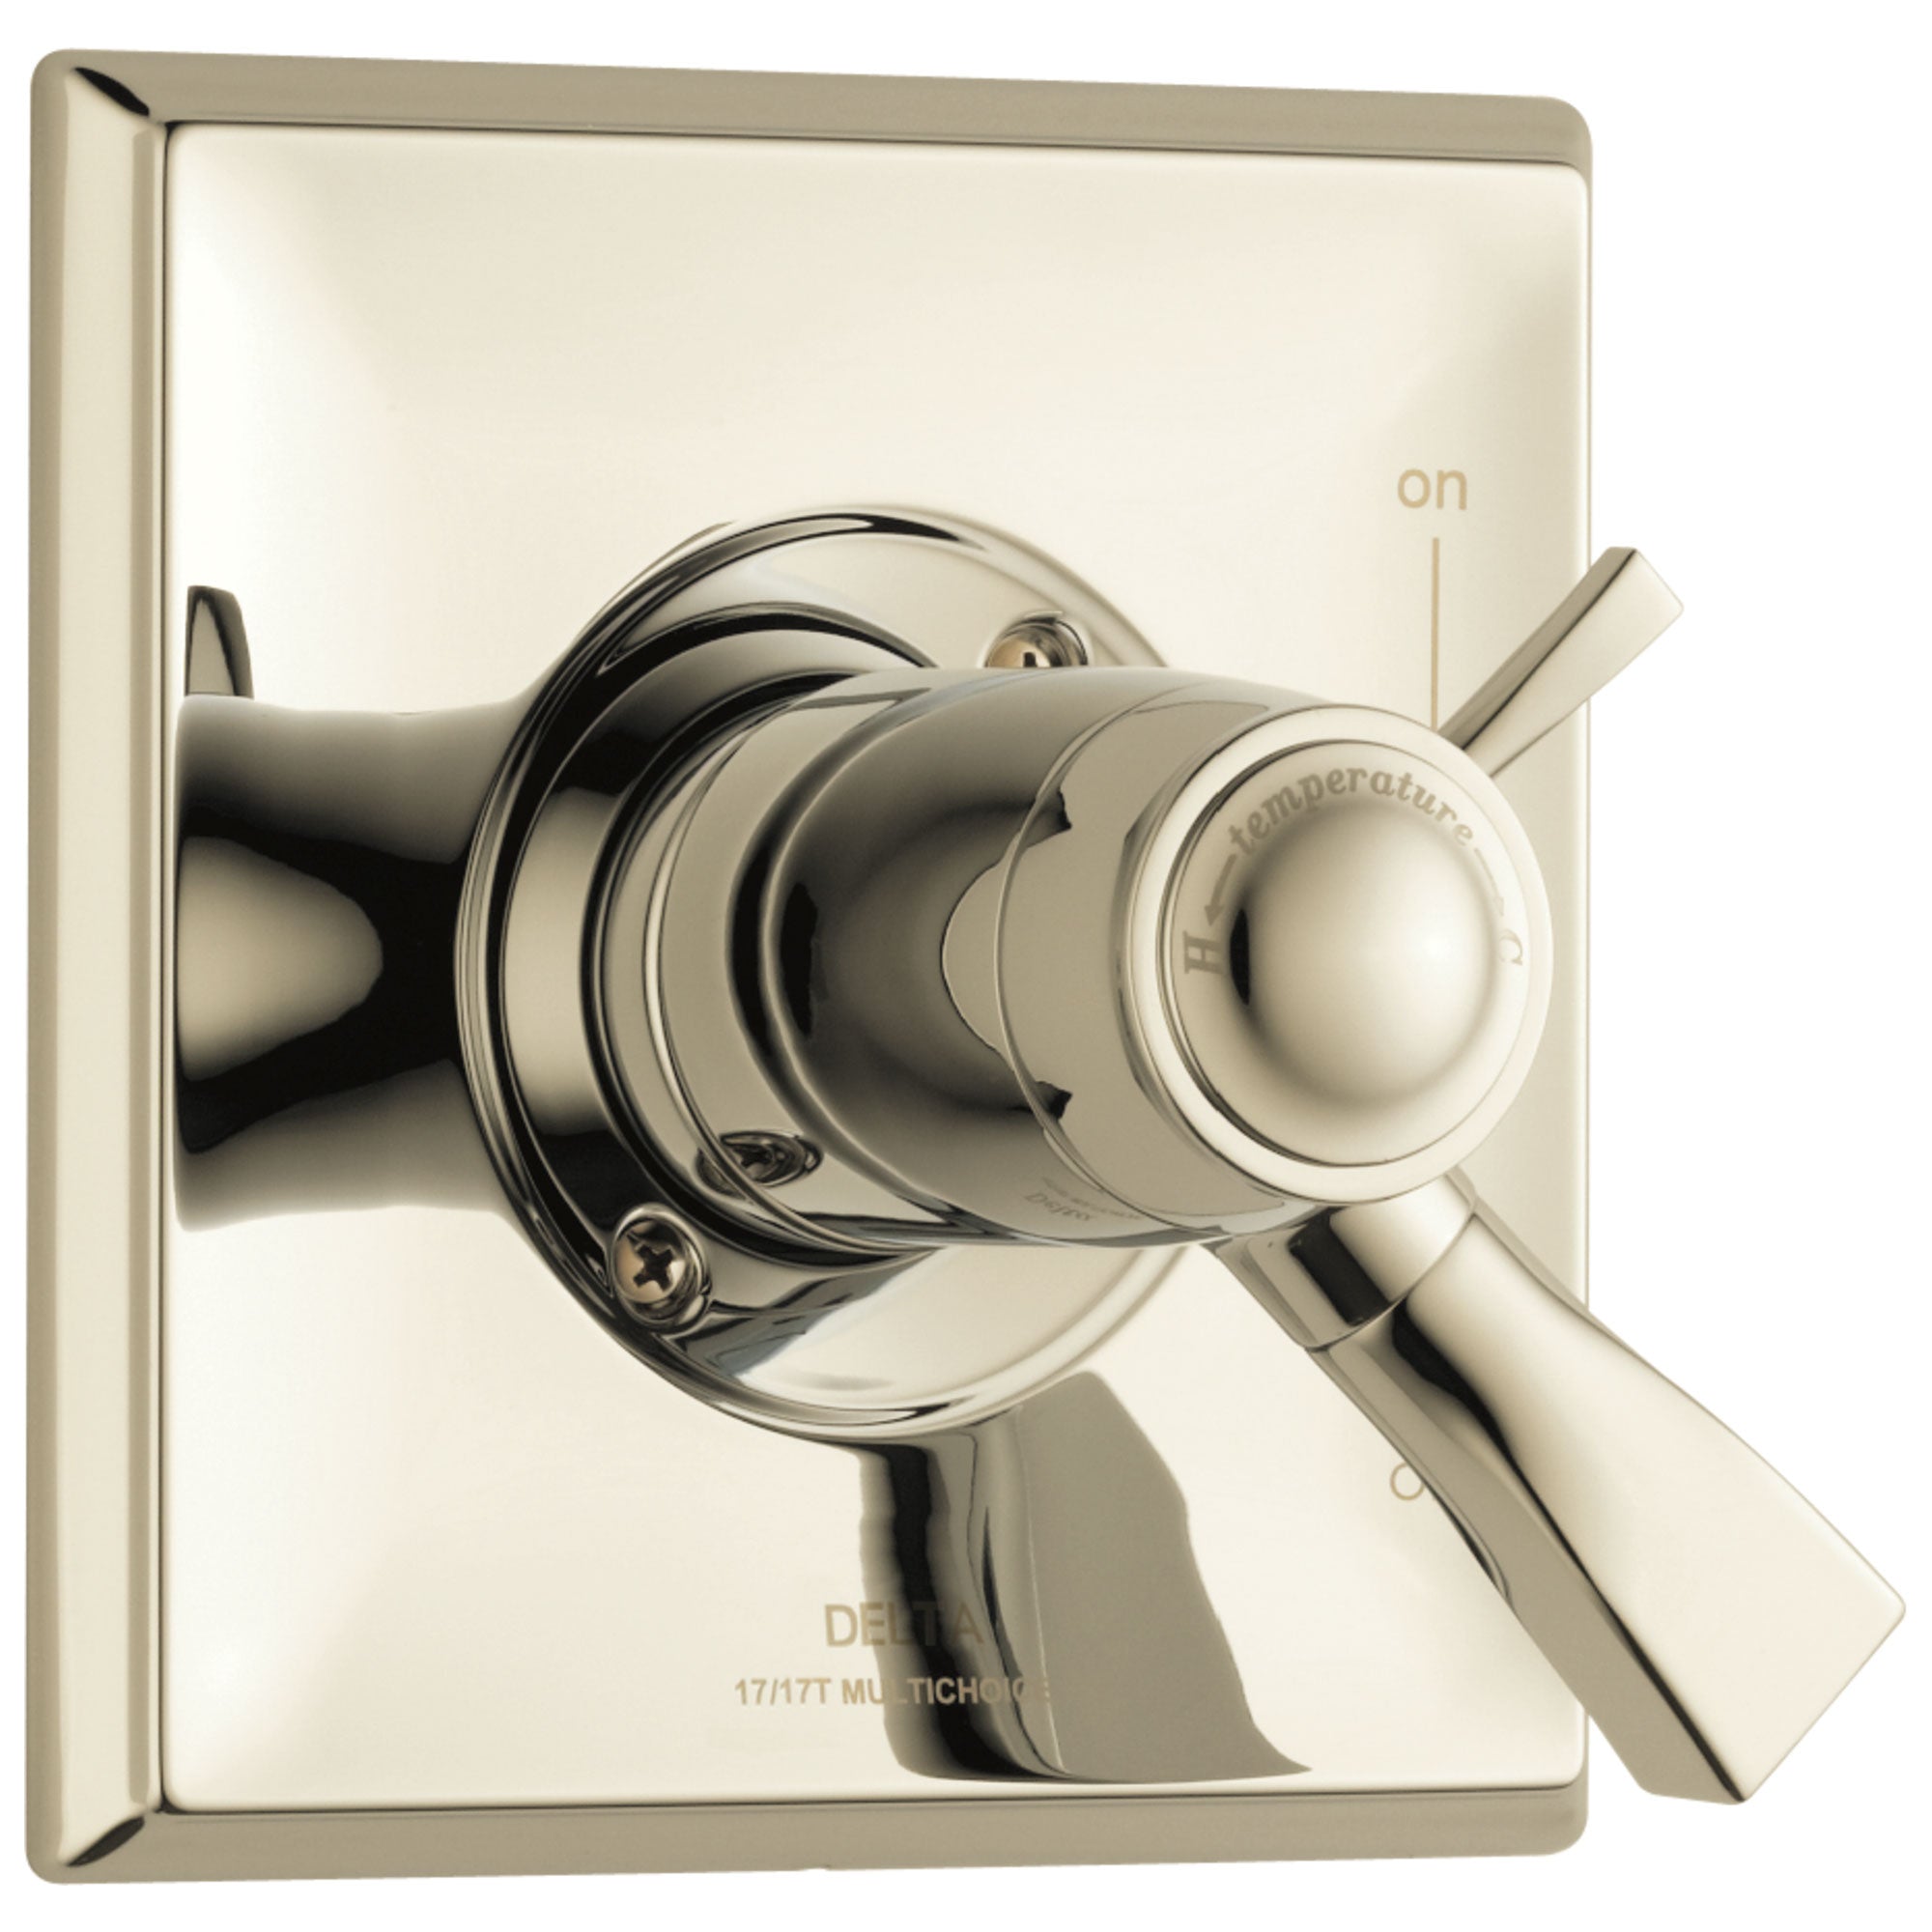 Delta Dryden Collection Polished Nickel Thermostatic Dual Temperature and Pressure Control Handle Valve Only Trim (Requires Valve) DT17T051PN